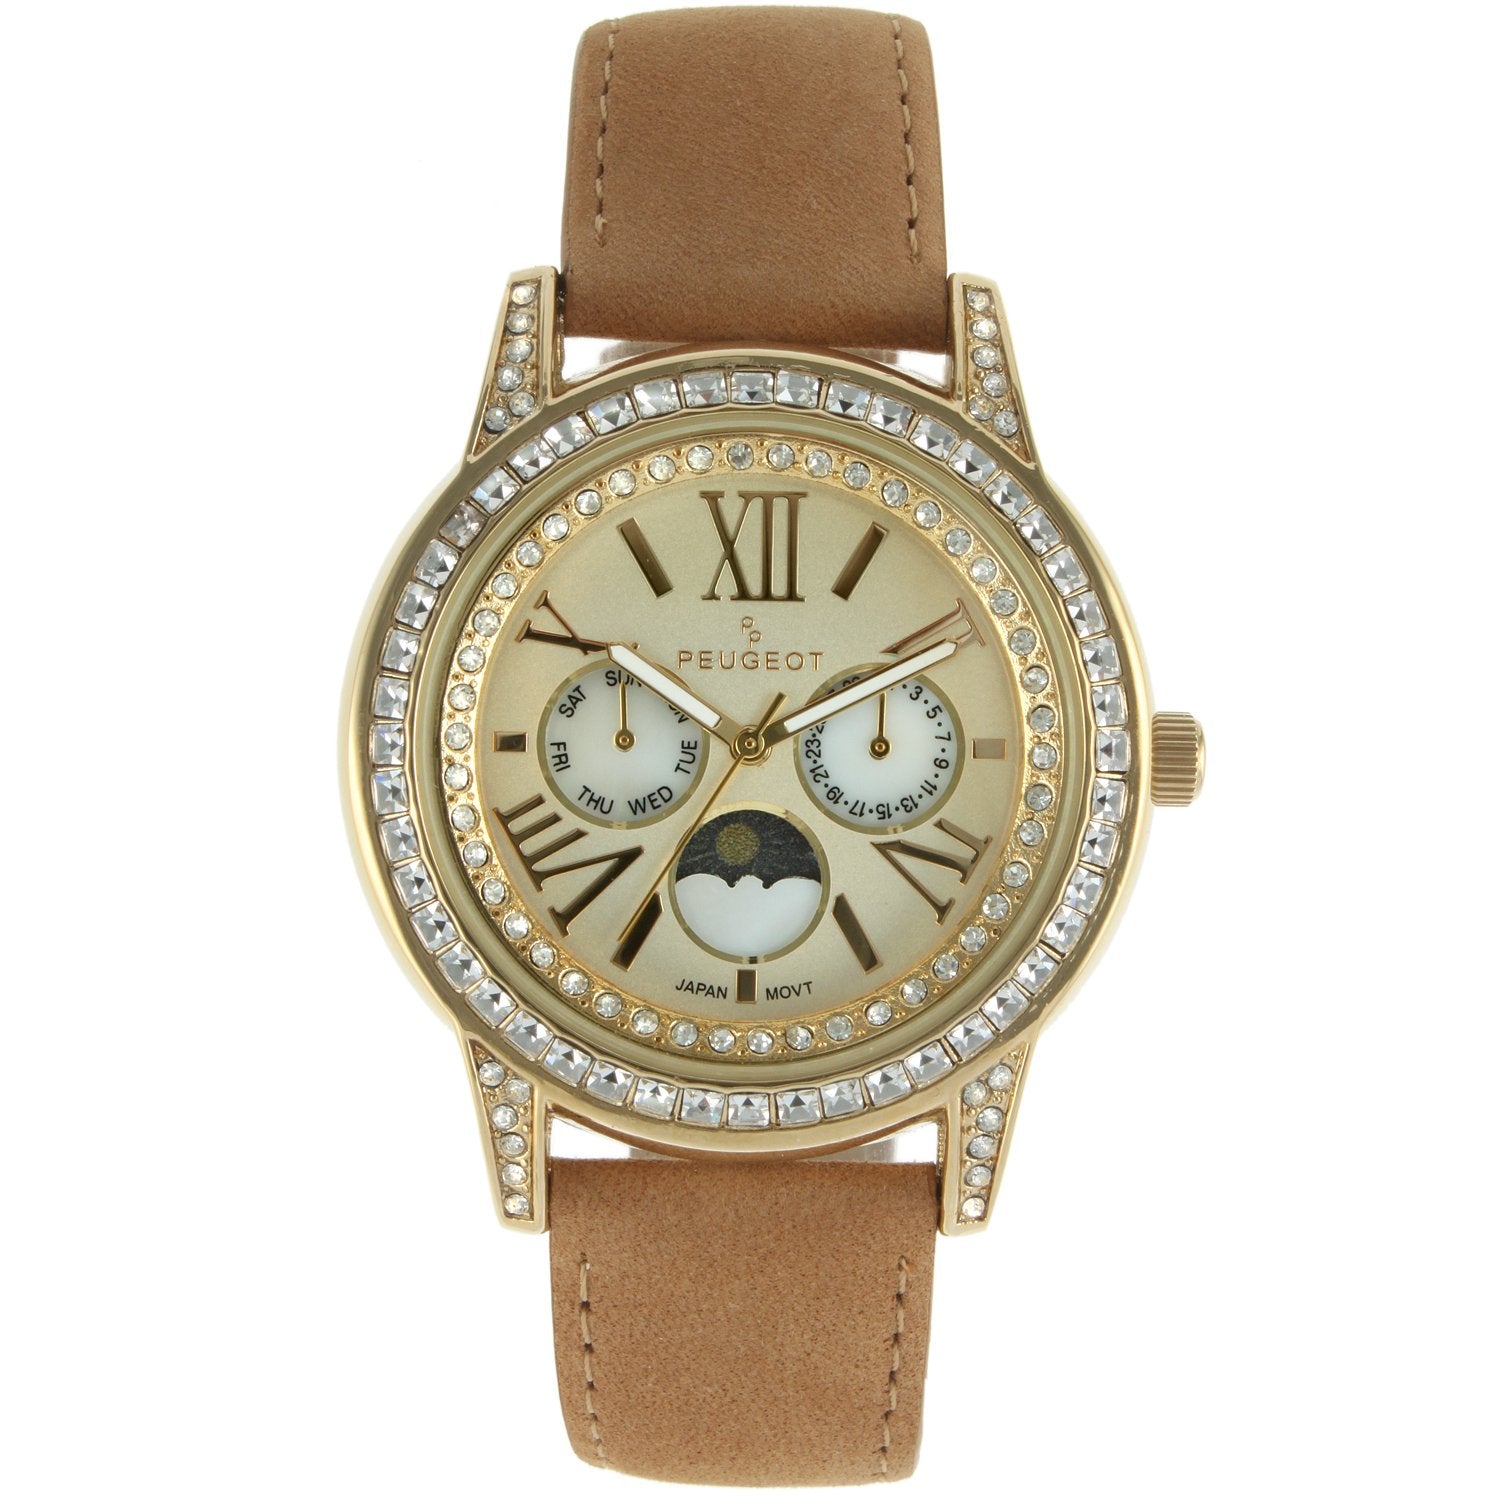 Woman Watches- Multi-function Crystal Dress Watch with Suede Strap by  Peugeot - Peugeot Watches